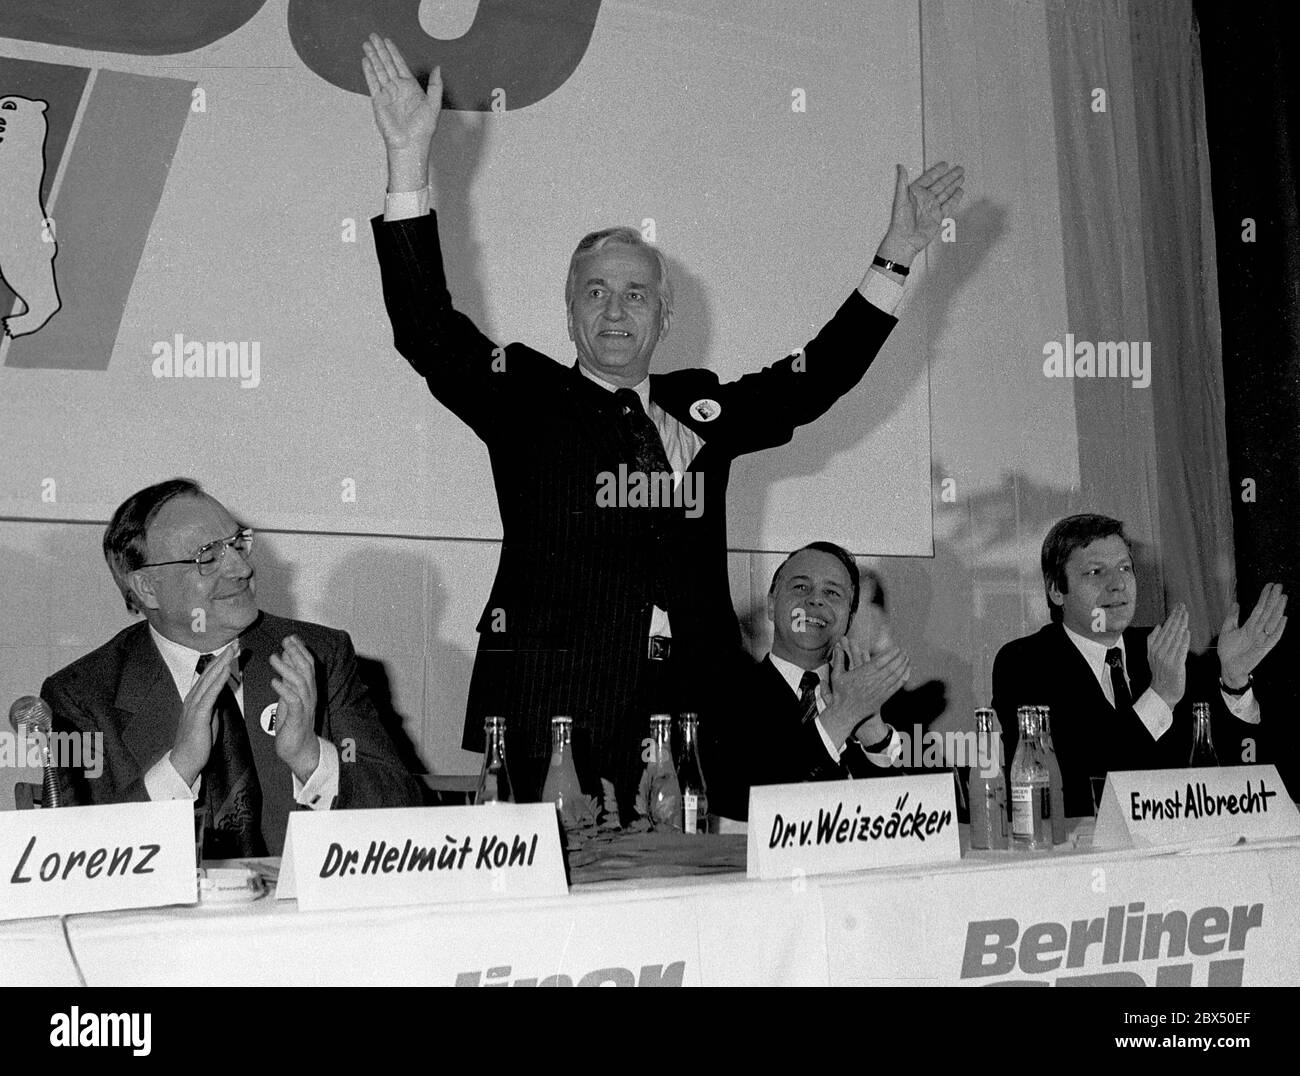 Berlin / Parties / CDU / 15.3.1979 Richard von Weizsaecker is to become top candidate for the Berlin CDU. Election campaign actions in Berlin, New World. Left Helmut Kohl, right Ernst Albrecht, Eberhard Diepgen [automated translation] Stock Photo